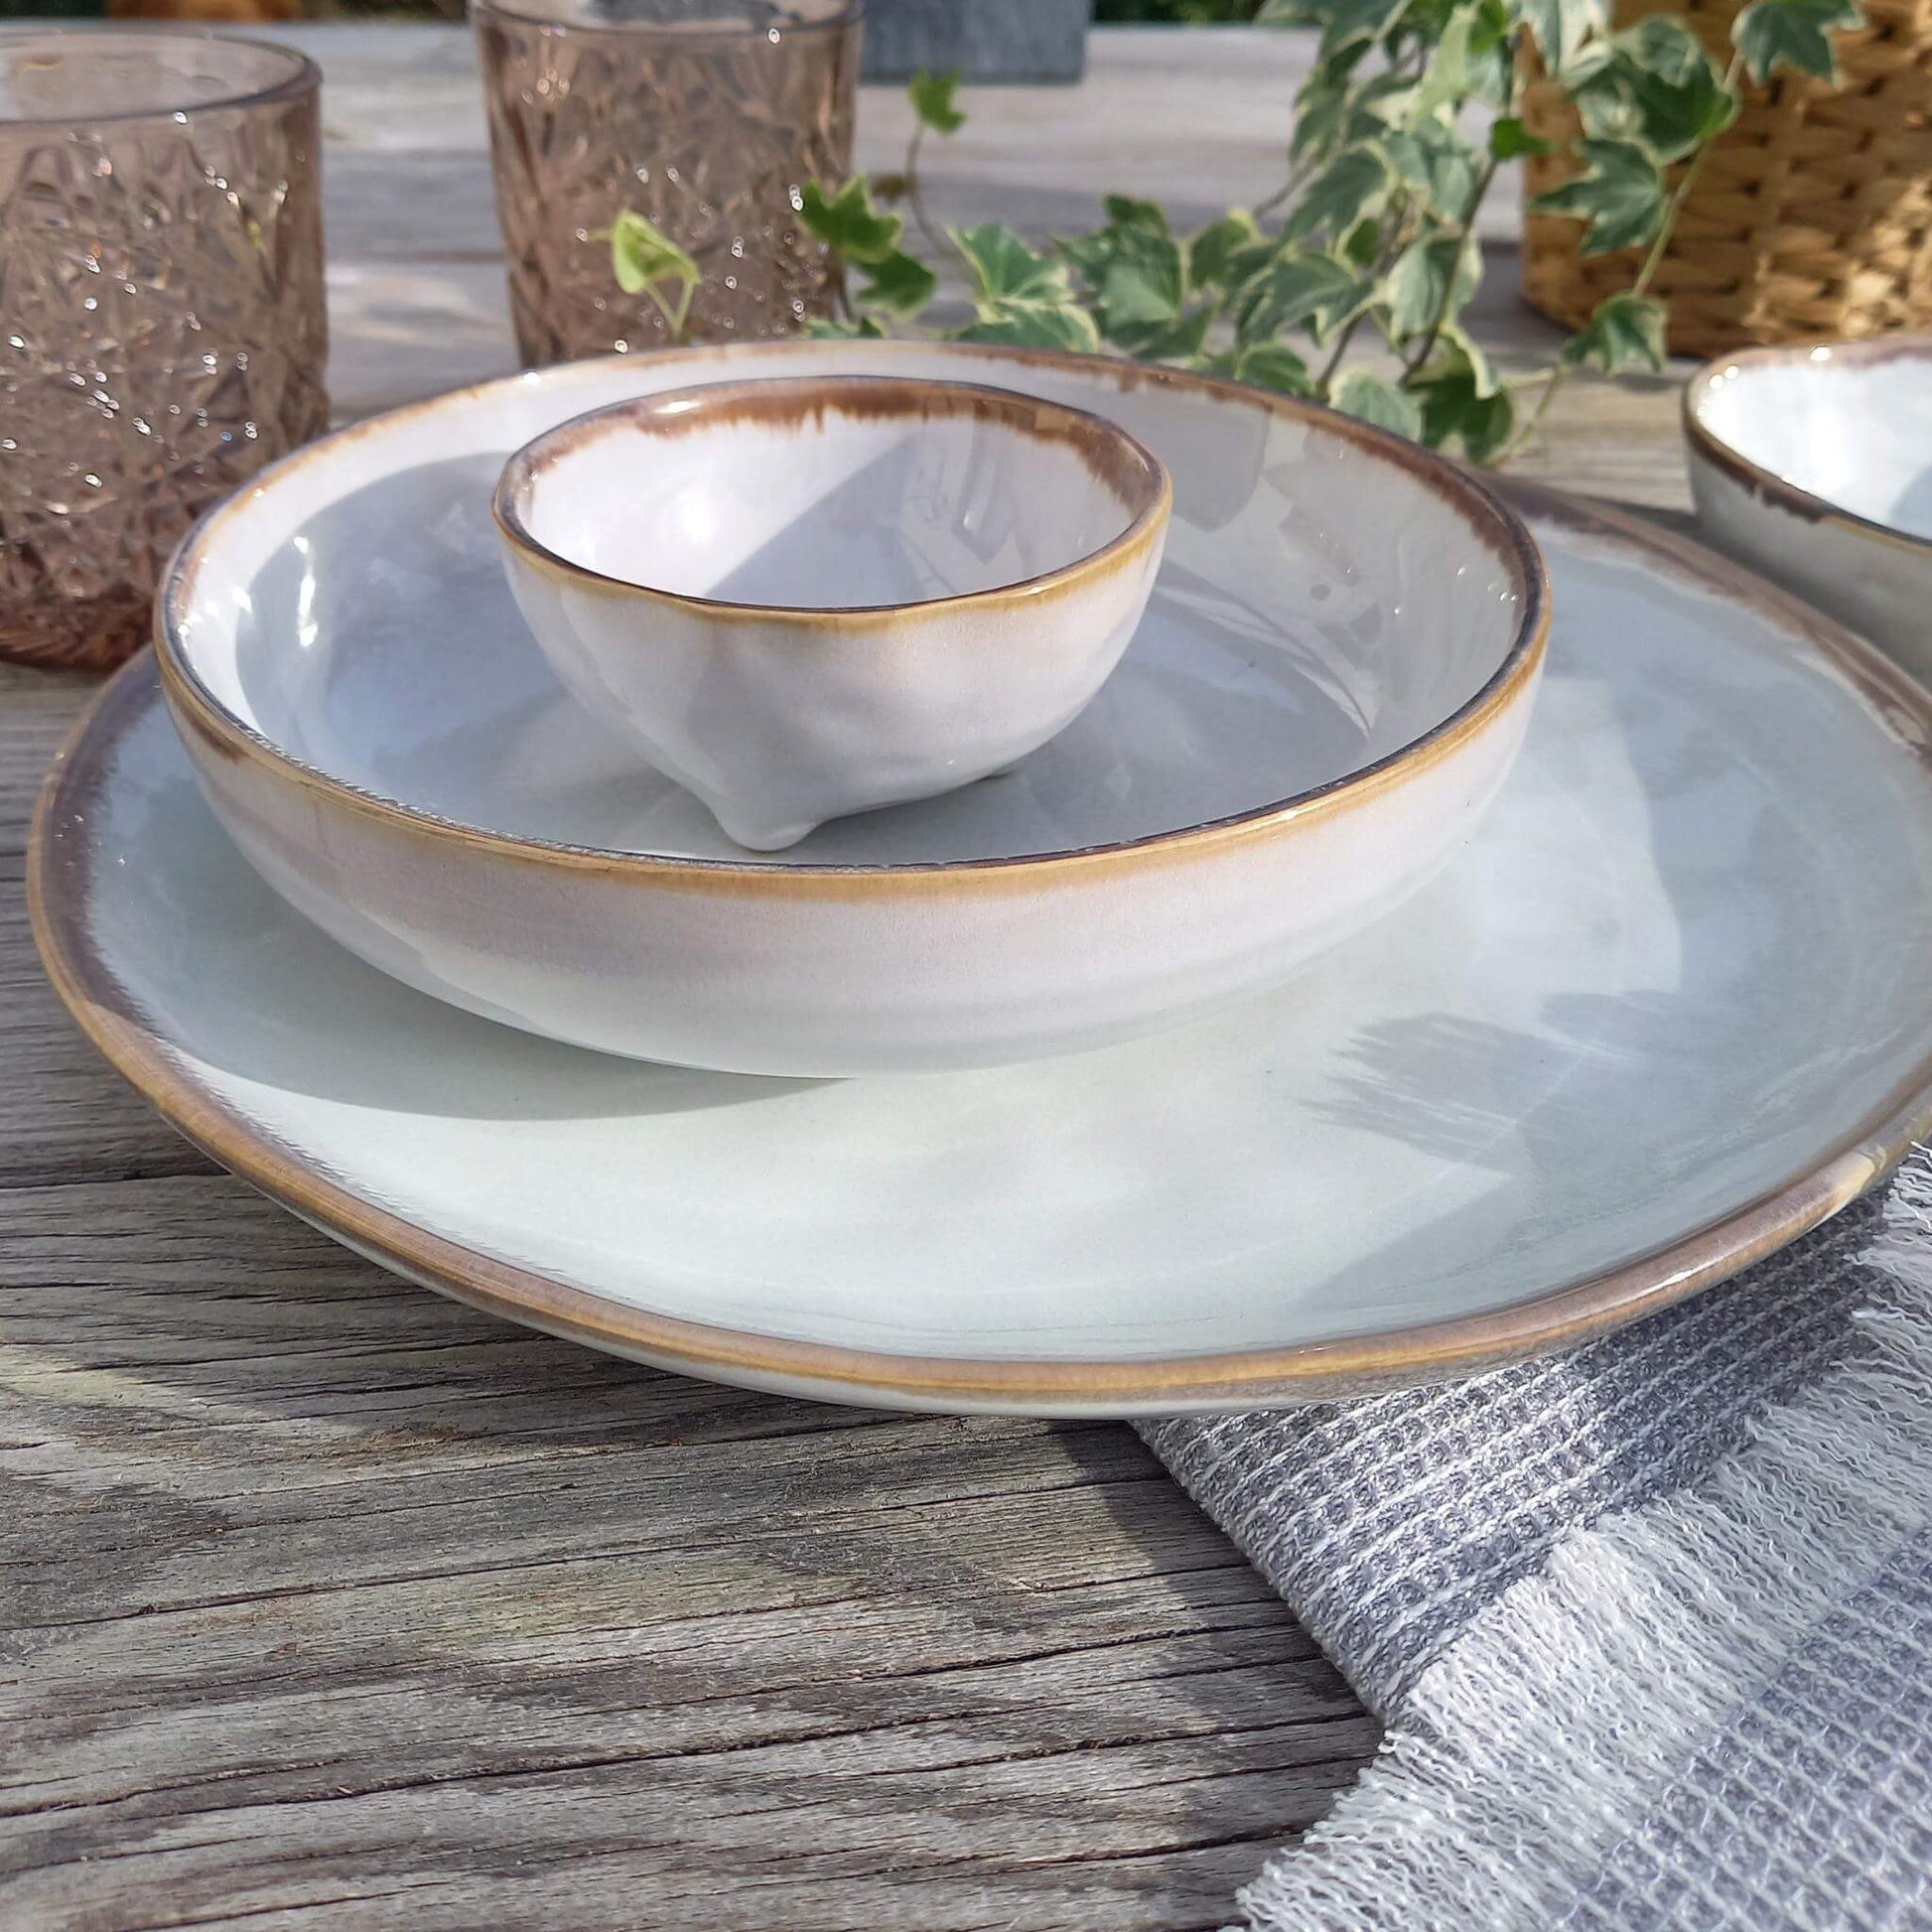 Biarritz - mother-of-pearl pedestal white bowl 9.5 cm - Unik by Nature